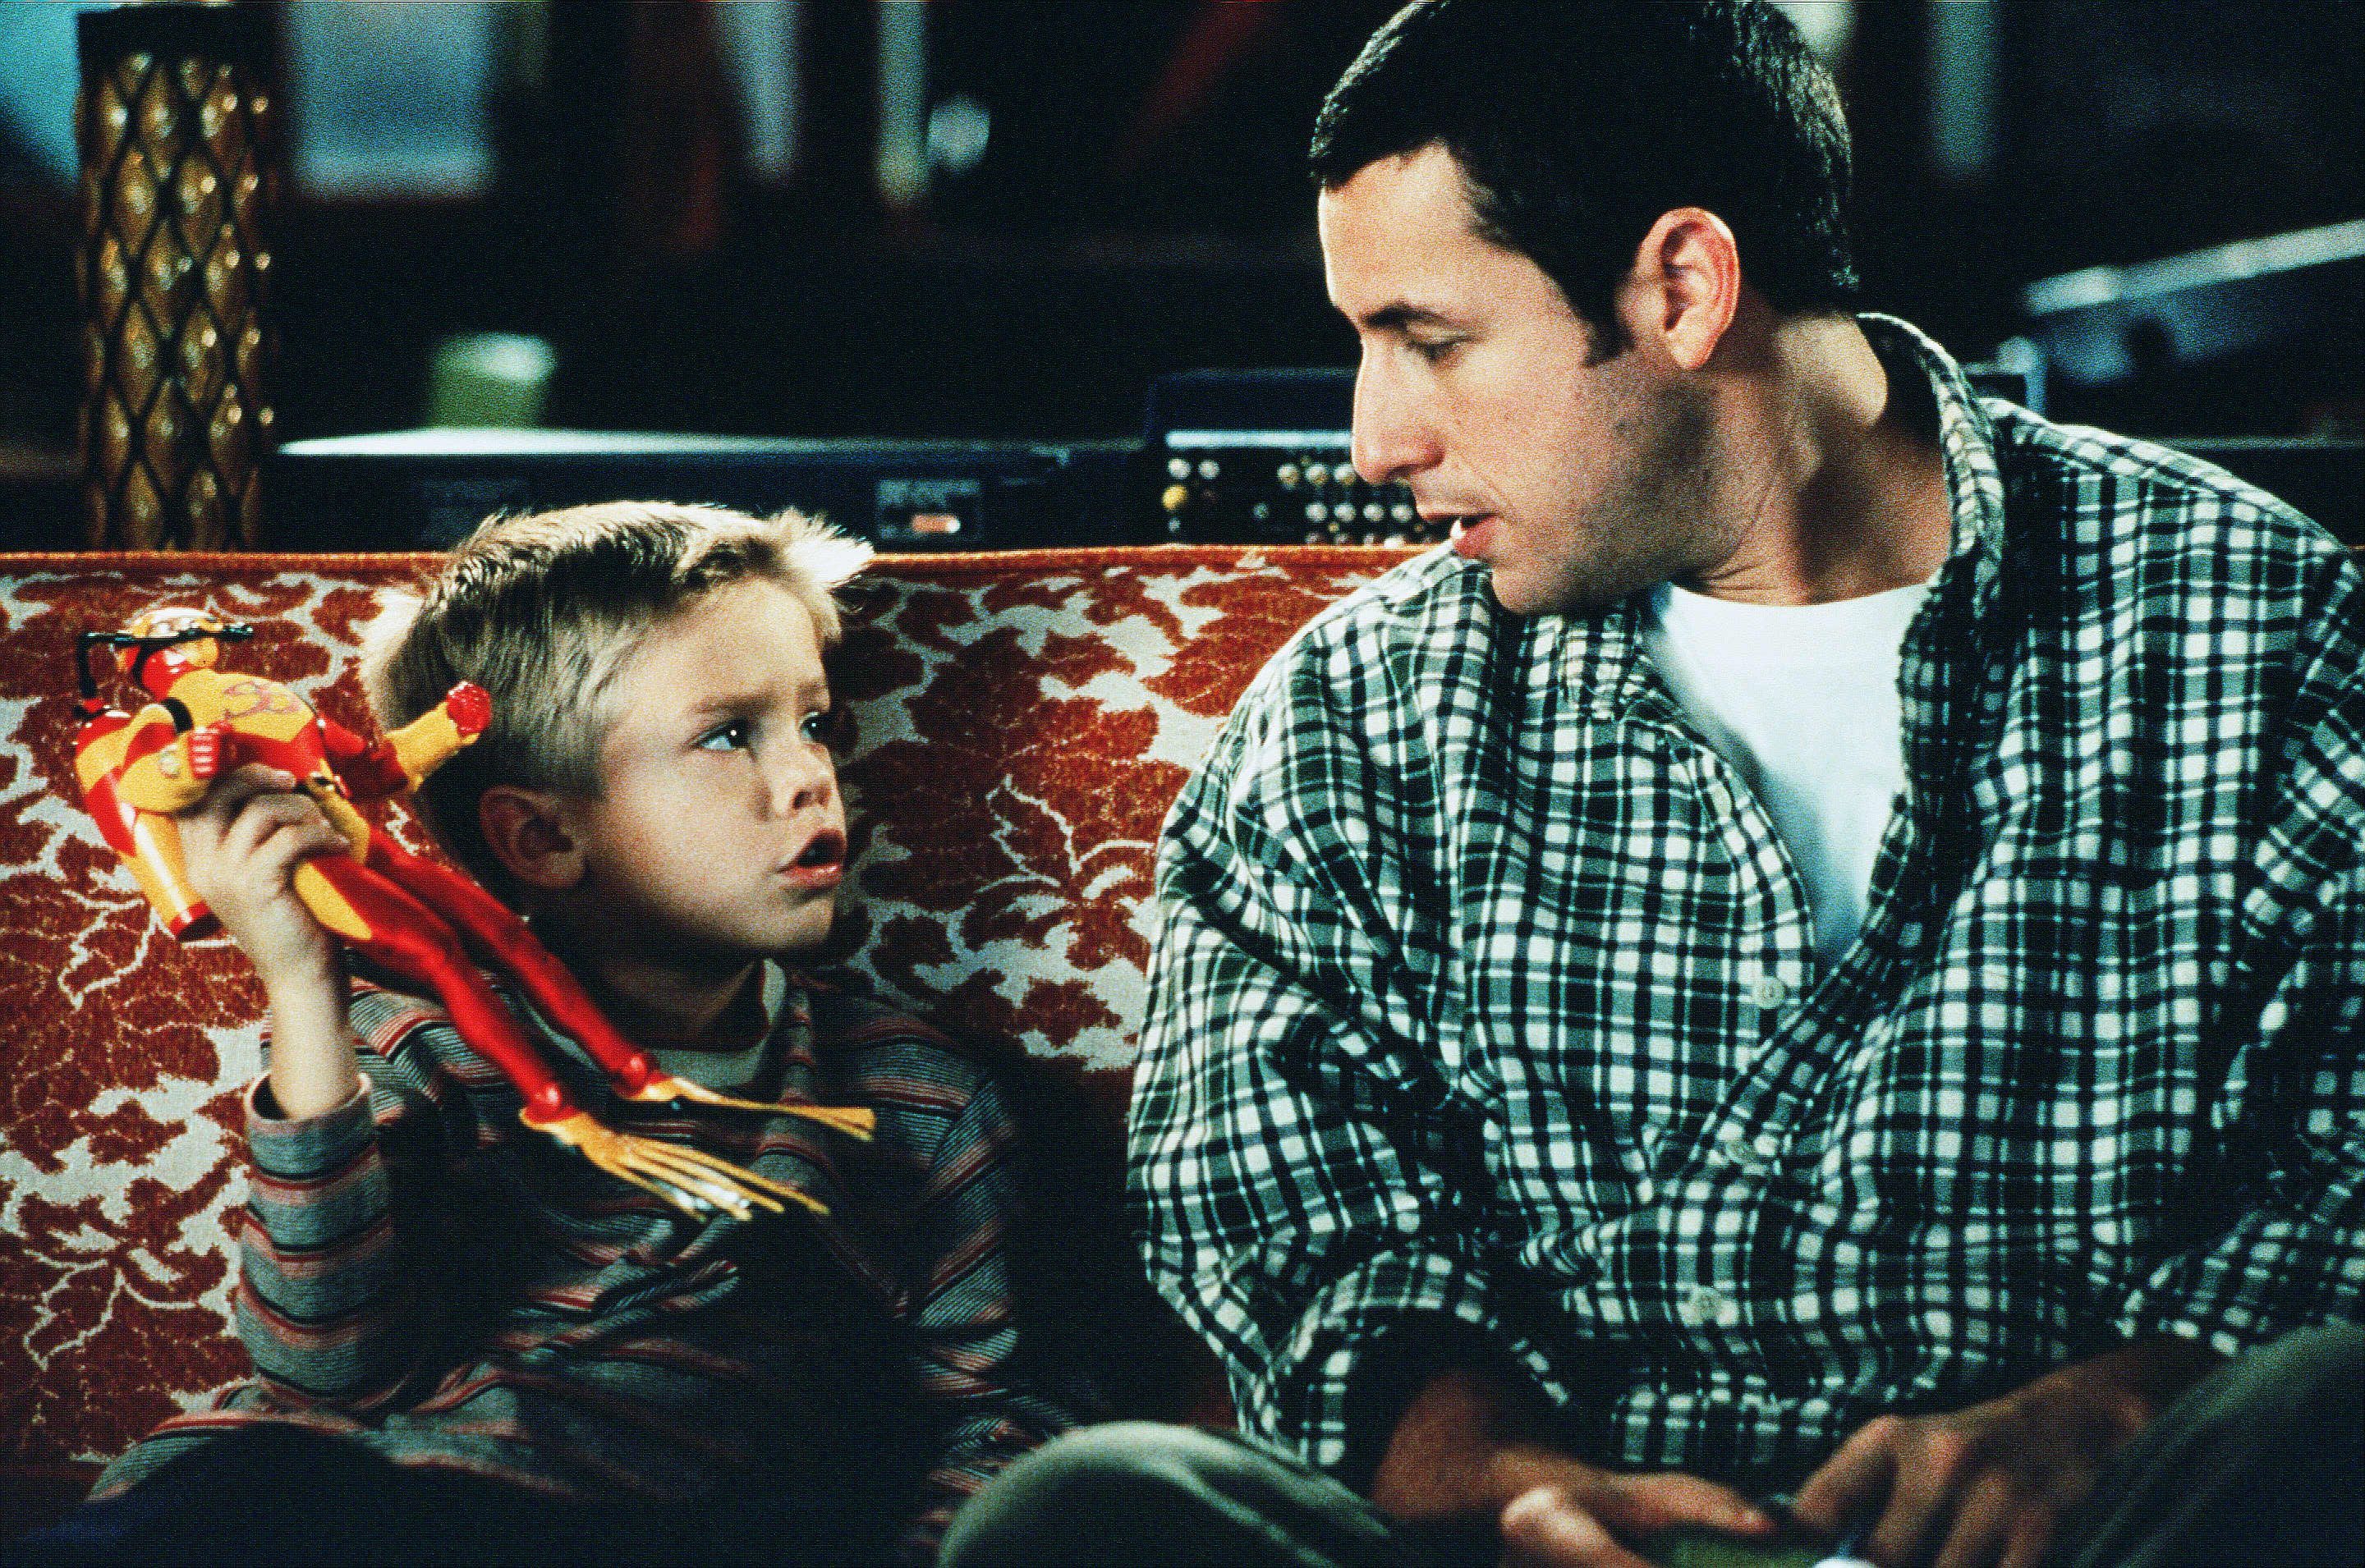 <p>Twins Cole and Dylan Sprouse played one character, Julian, in the 1999 film "Big Daddy" opposite <a href="https://www.wonderwall.com/celebrity/profiles/overview/adam-sandler-840.article">Adam Sandler</a>. They went on to star on their own Disney Channel show, "The Suite Life of Zack & Cody," and its spinoff, "The Suite Life on Deck," from 2005 to 2011. </p>